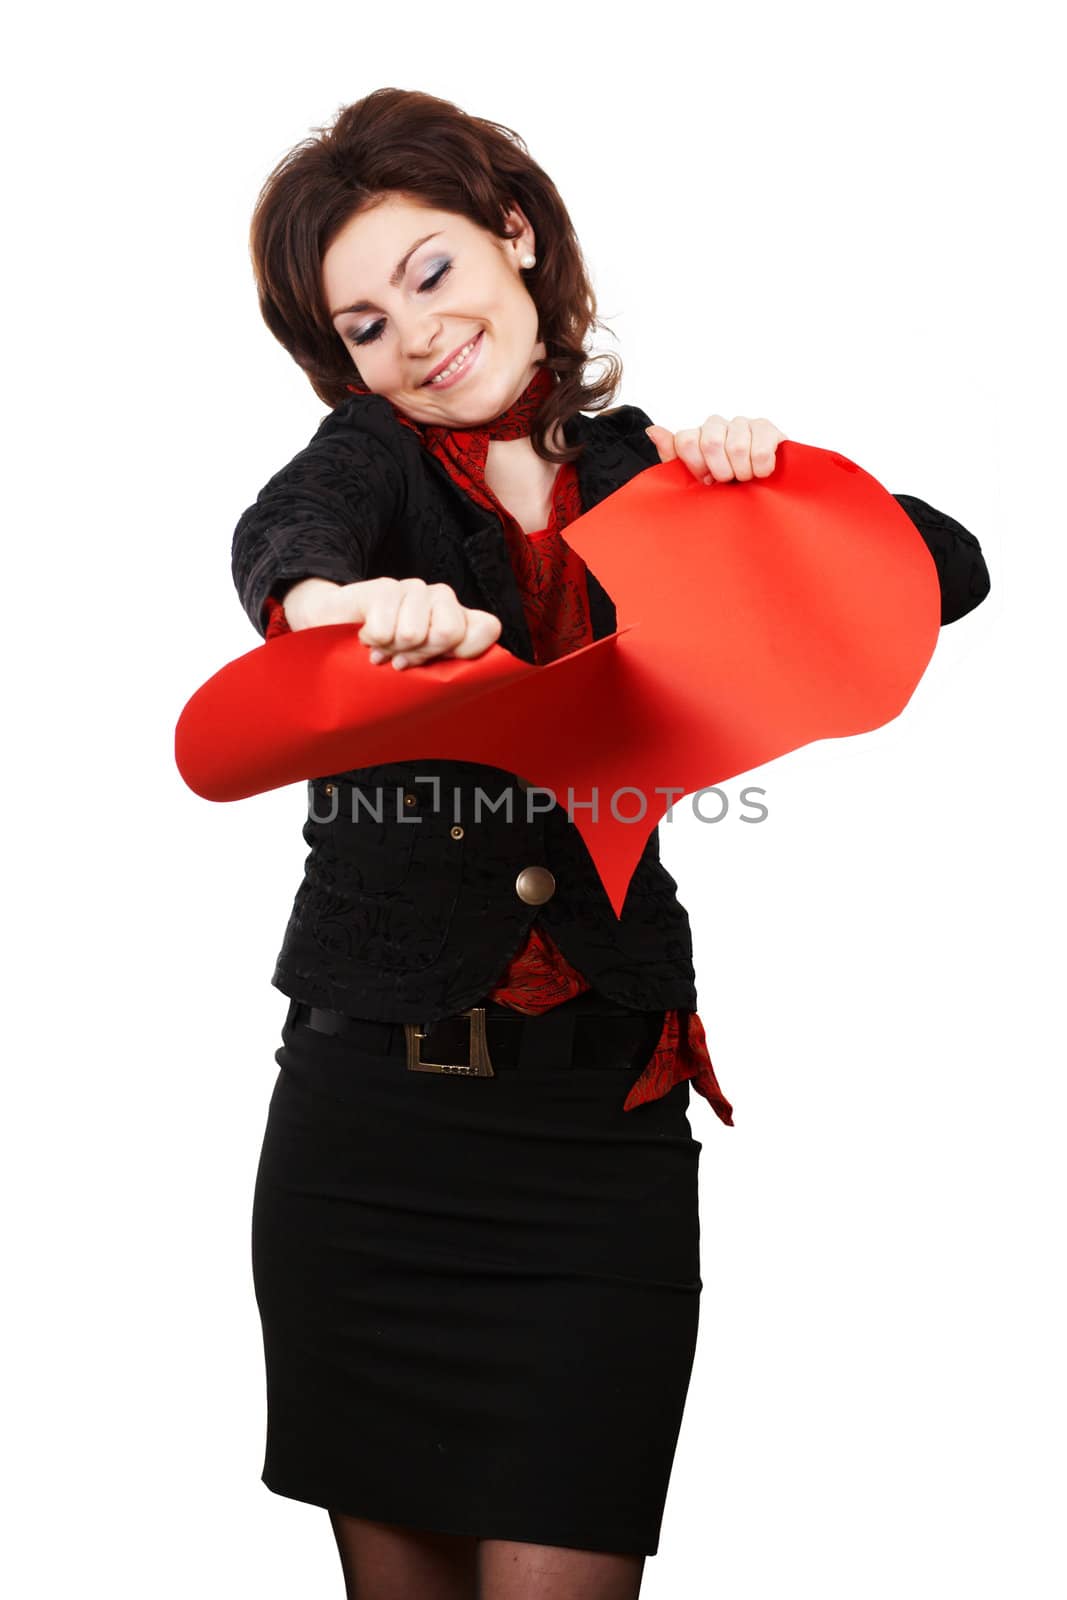 A smiling woman tearing a red peper heart